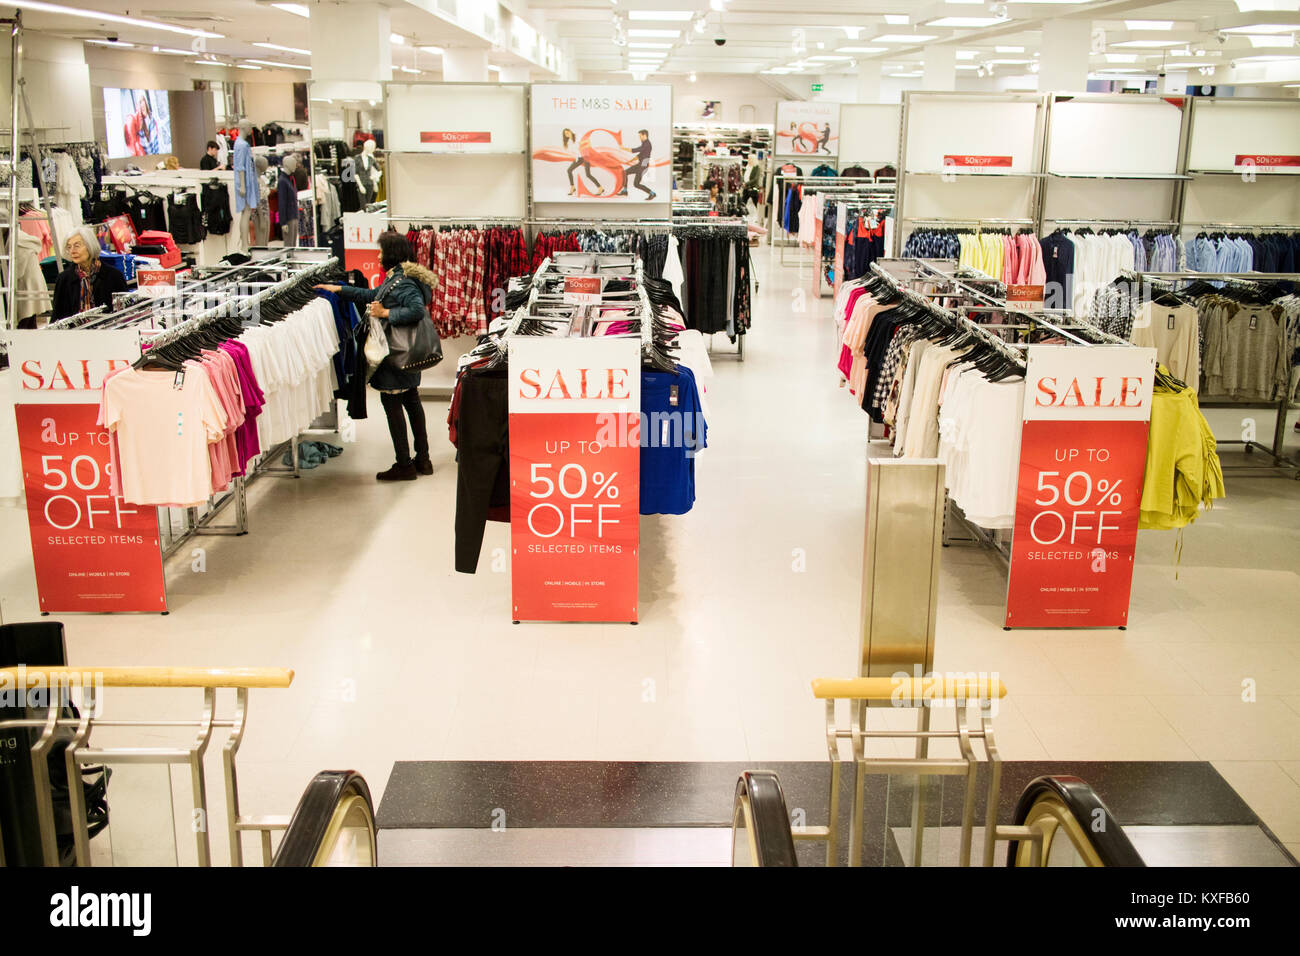 Sale at M&S clothes store 50% off Stock Photo - Alamy